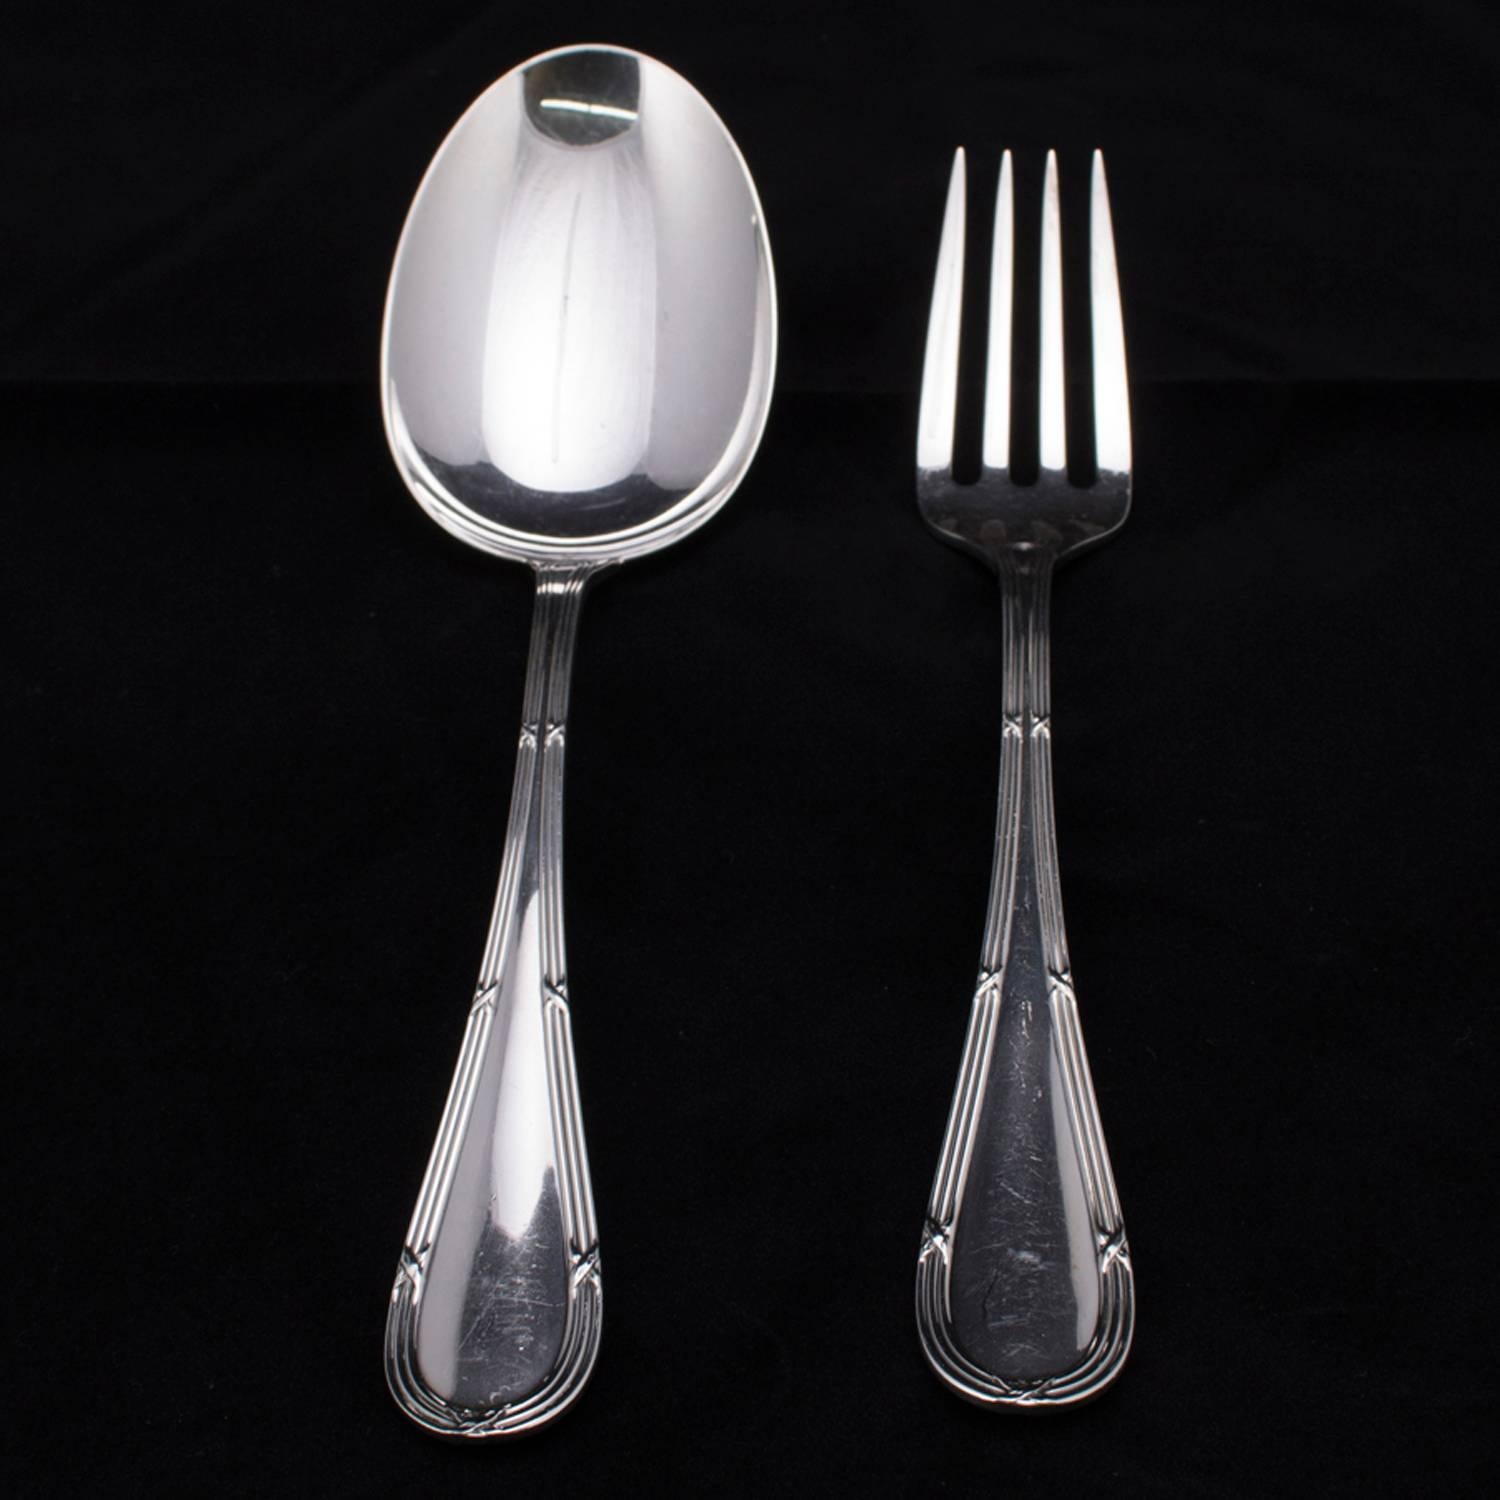 Italian Buccellati sterling silver spoon and fork serving set, en verso maker and sterling marks, 9.68 toz, circa 1930.

Measure: 11